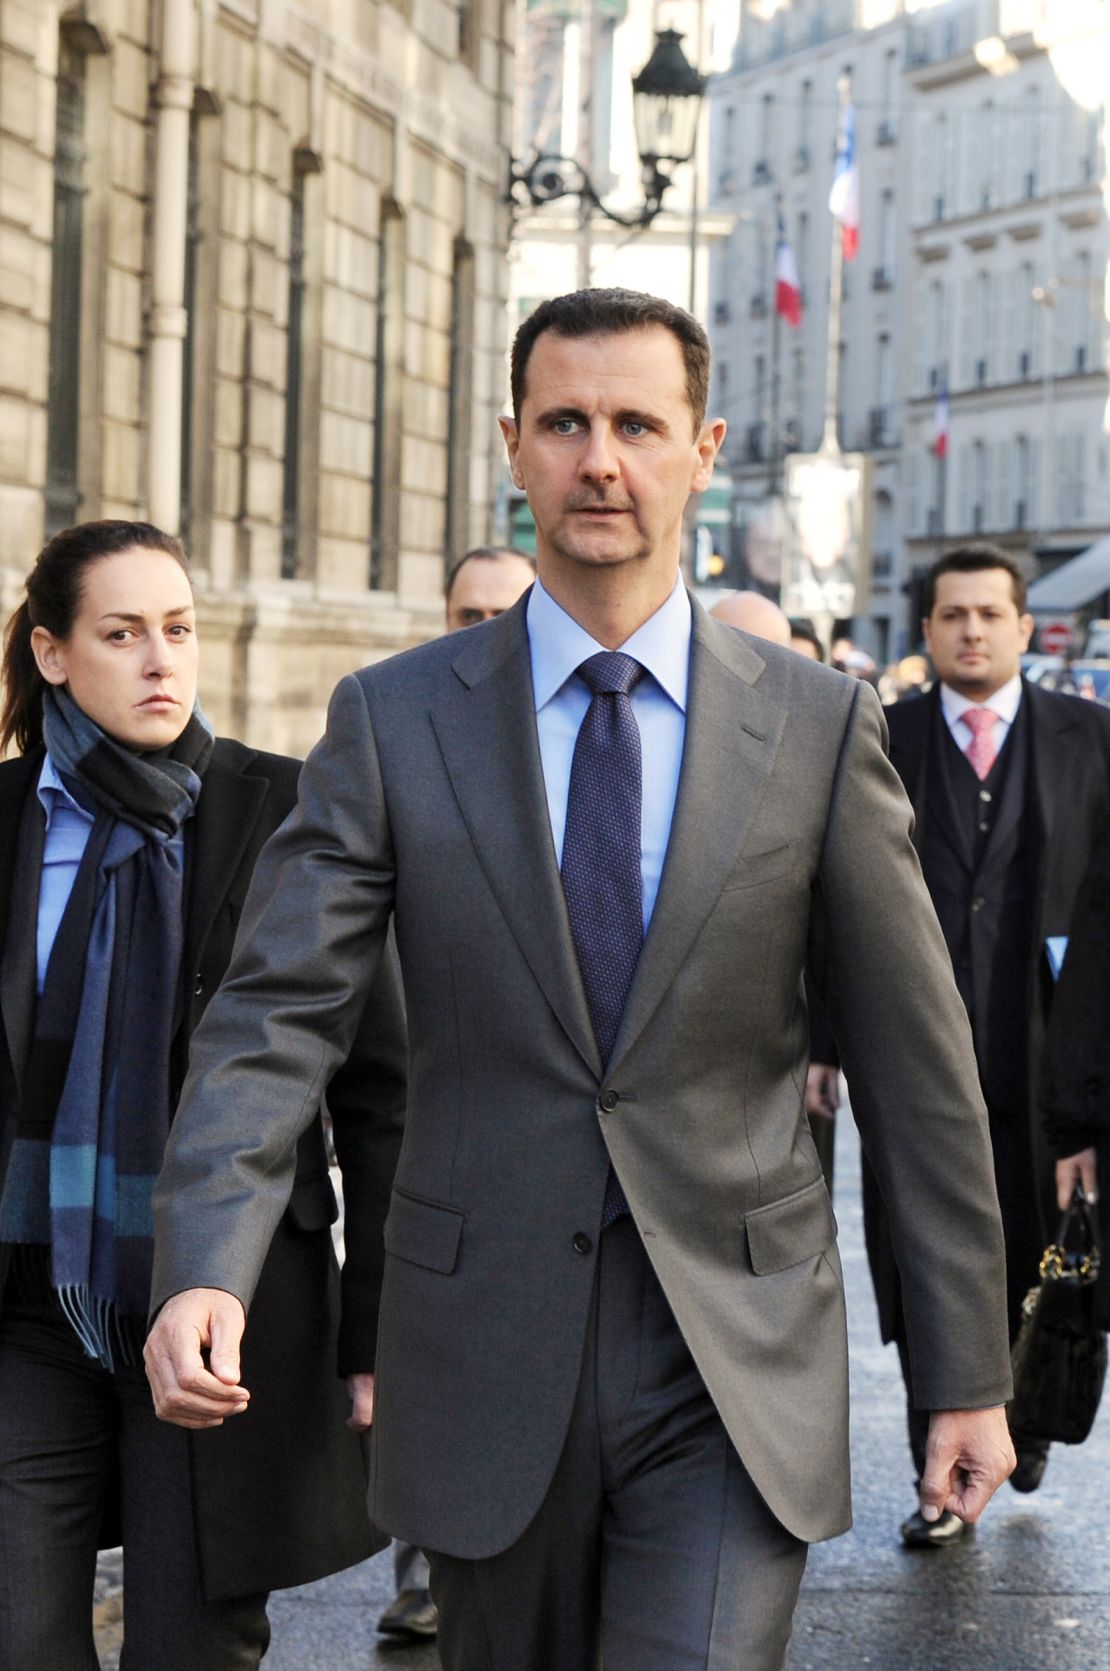 Syrian President Bashar al-Assad has been in power since 2000, when his father died.